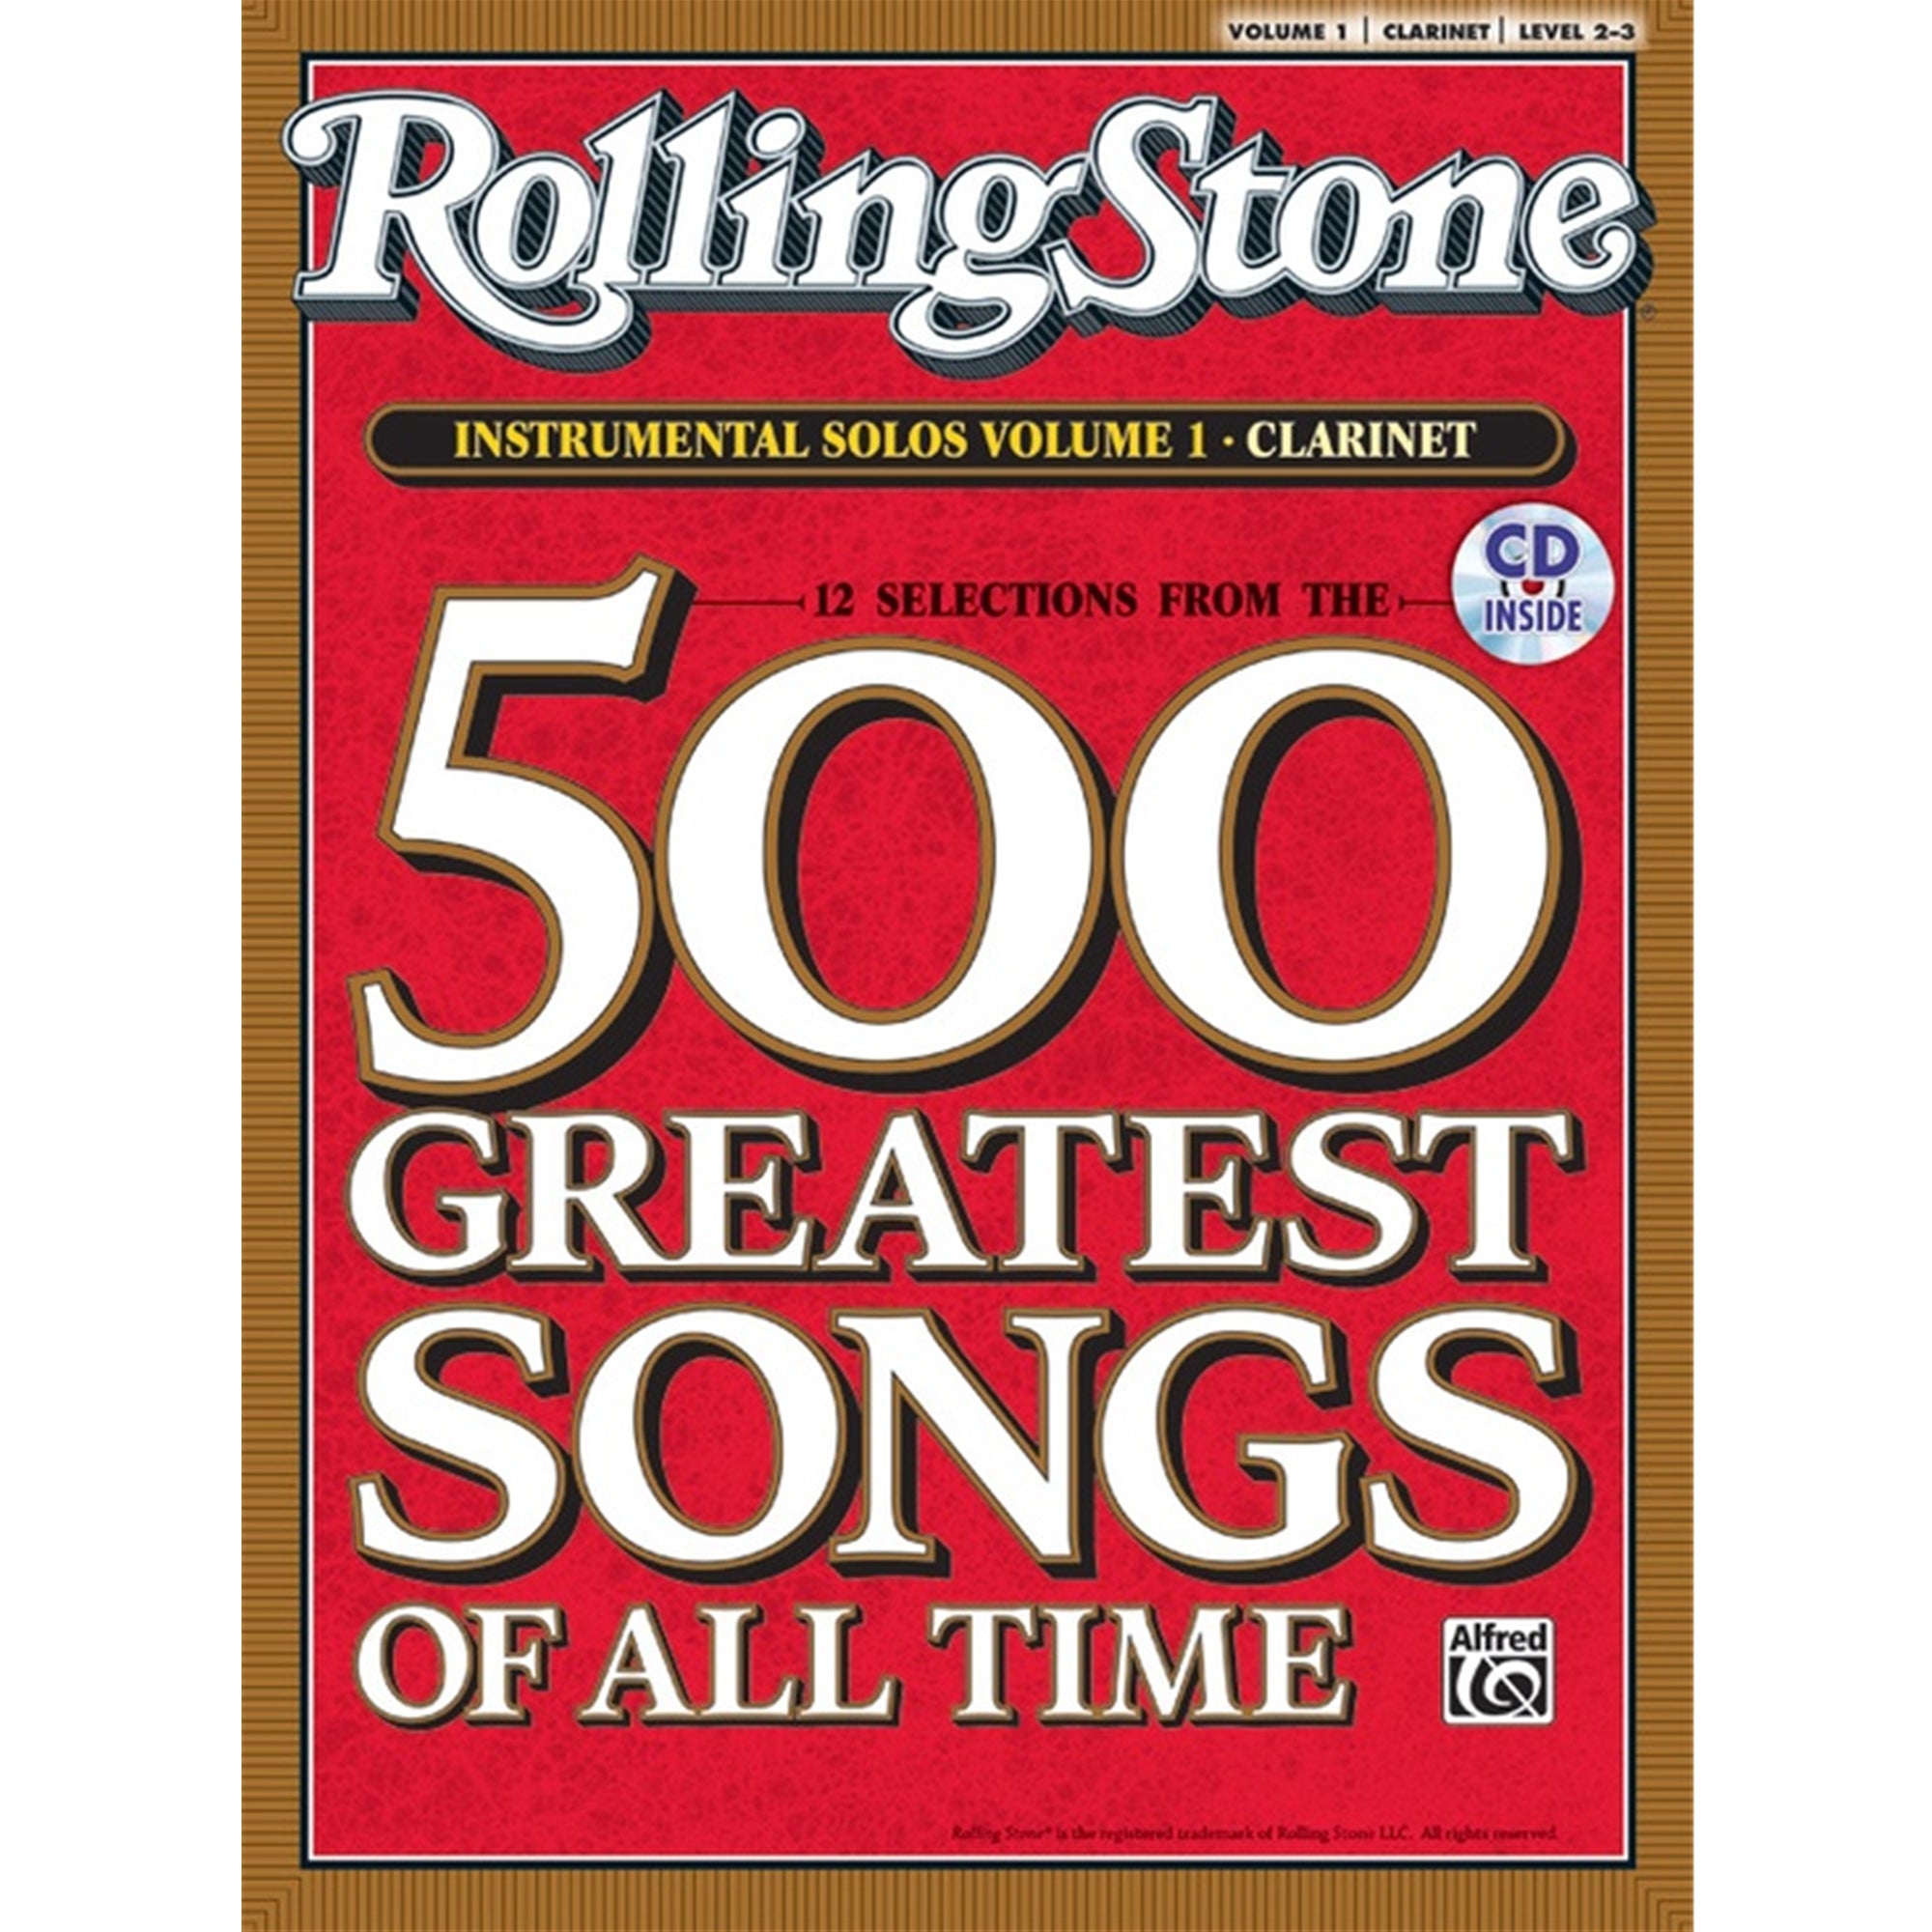 ALFRED 30338 Selections from Rolling Stone Magazine's 500 Greatest Songs of All Time: Instrumental Solos, Volume